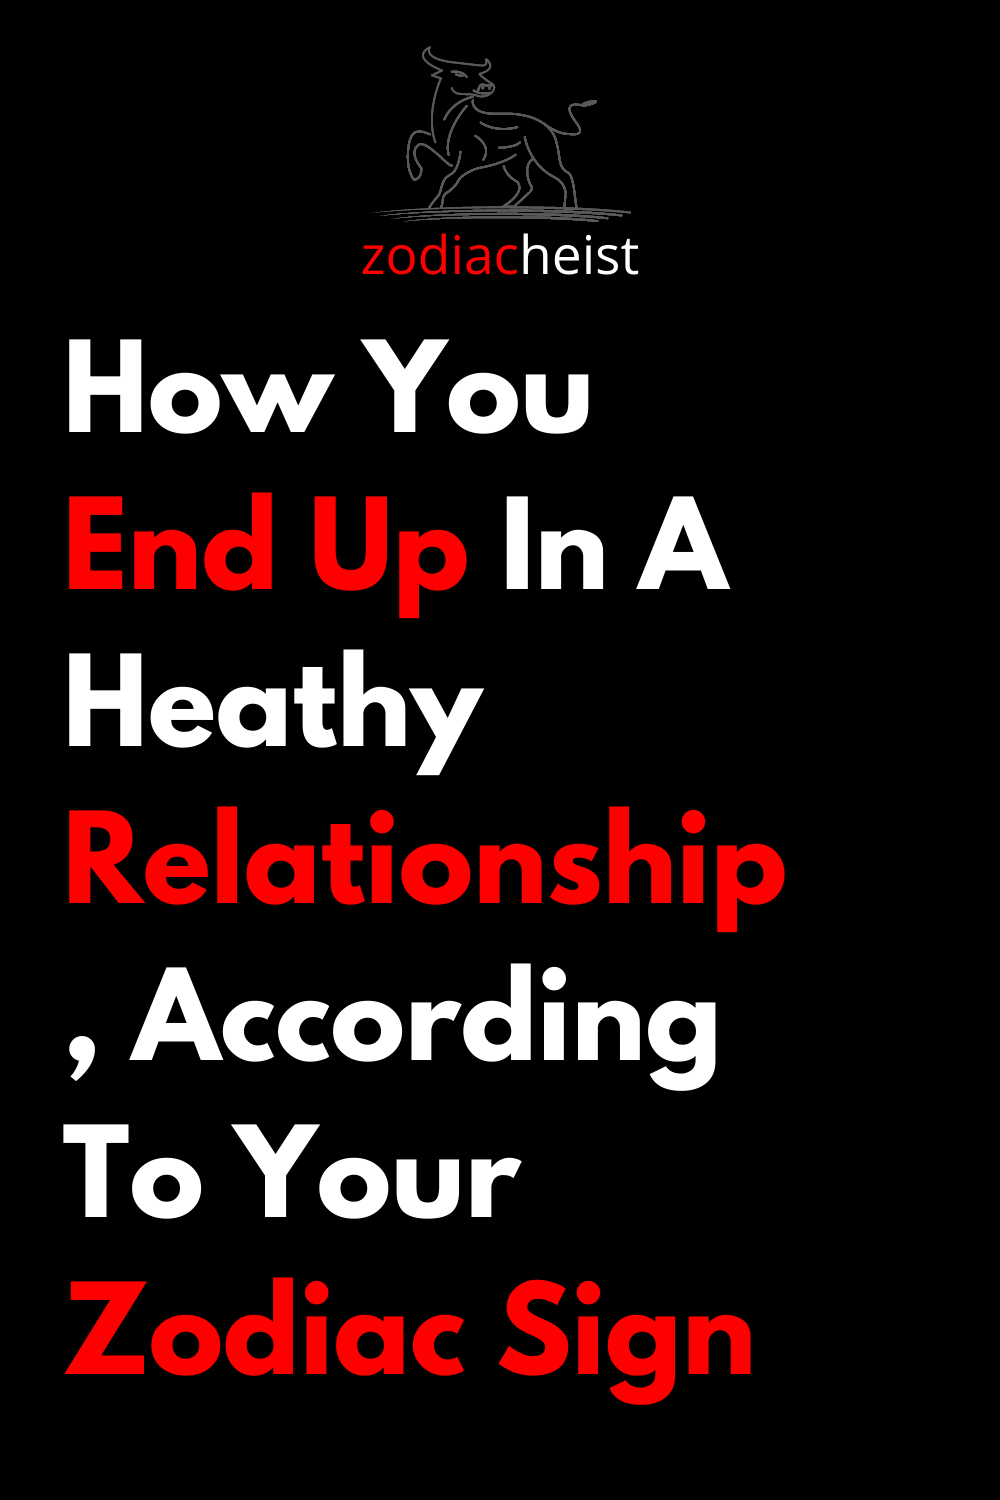 How You End Up In A Heathy Relationship, According To Your Zodiac Sign